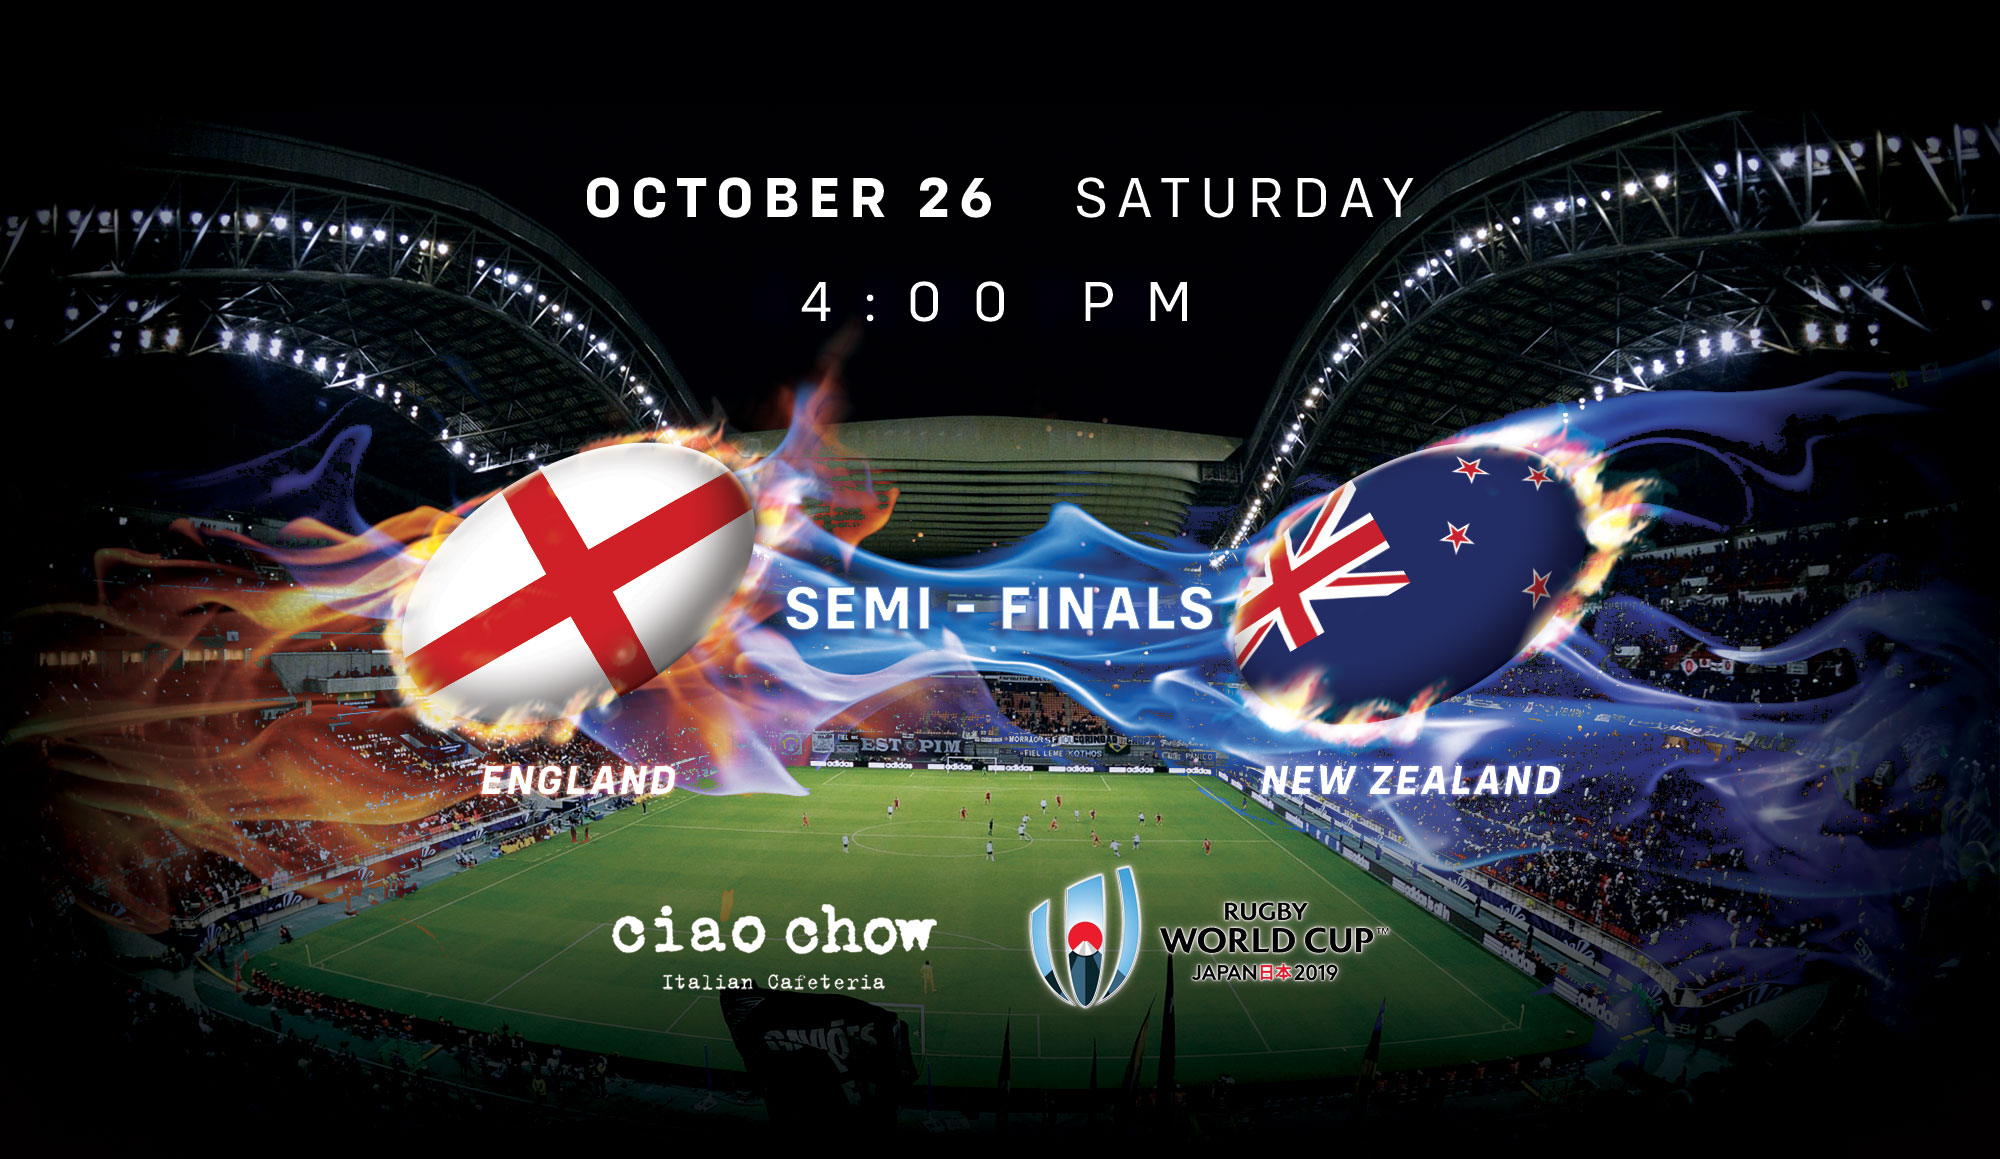 Enjoy touch line action on Ciao Chow's big screen this weekend when England play New Zealand on Saturday 4pm and Wales meet South Africa on Sunday 5pm. You'll need nerves of steel and 2 hours of free-flow Peroni beer (just $199) to get you through the semi-finals and find out who will face off for the big final on 2 November!  🎥Two 110' projector screens. Three 55' flat screens. 25 craft beers on tap....